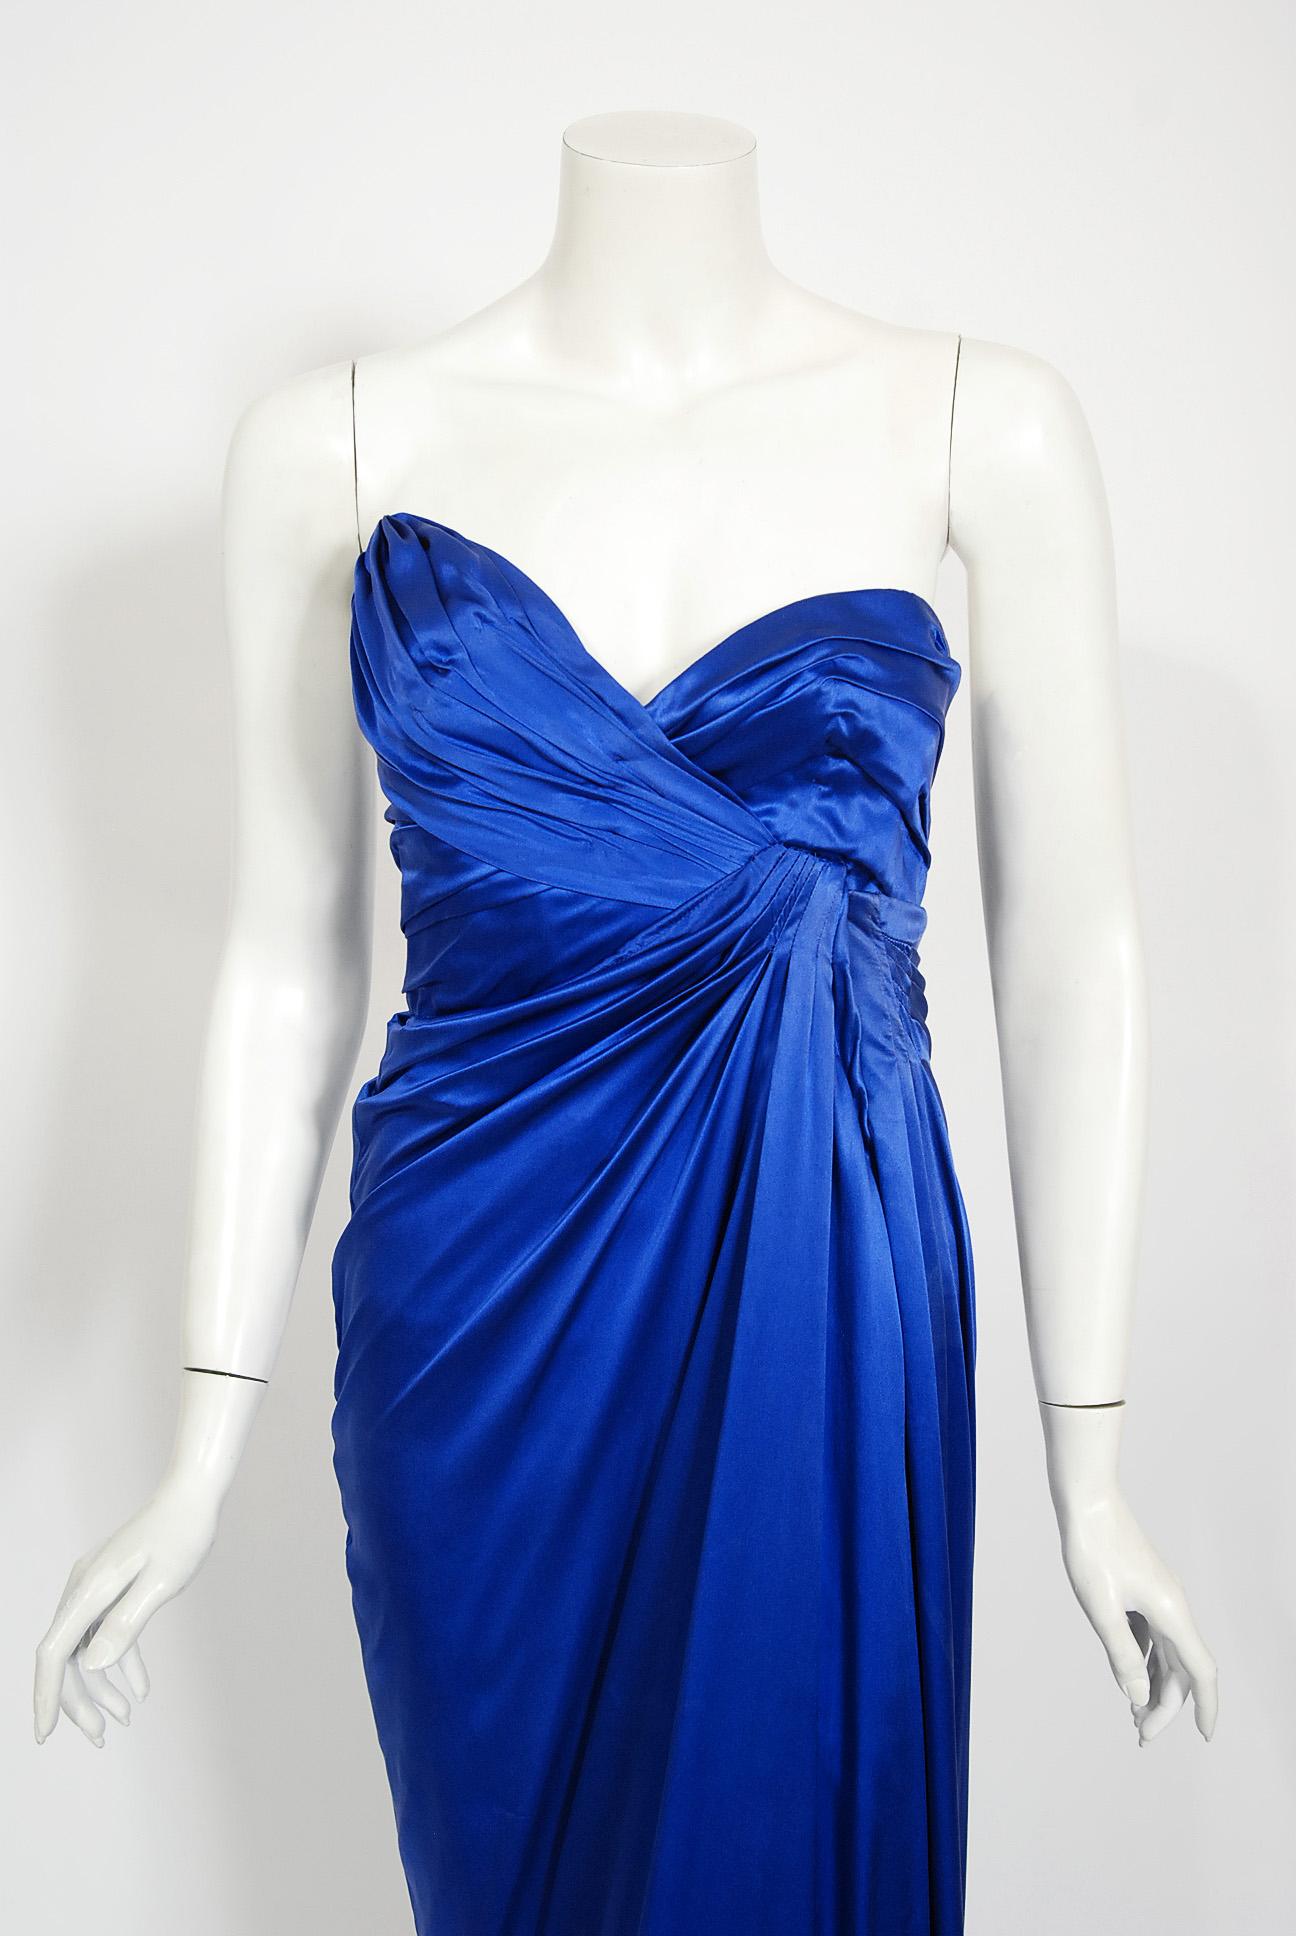 An iconic and well documented Thierry Mugler 1990 fall-winter sapphire blue silk corset strapless gown with original $6500 price tag attached. With inflation, that would be over $15,000 today. This legendary French fashion designer is known for bold